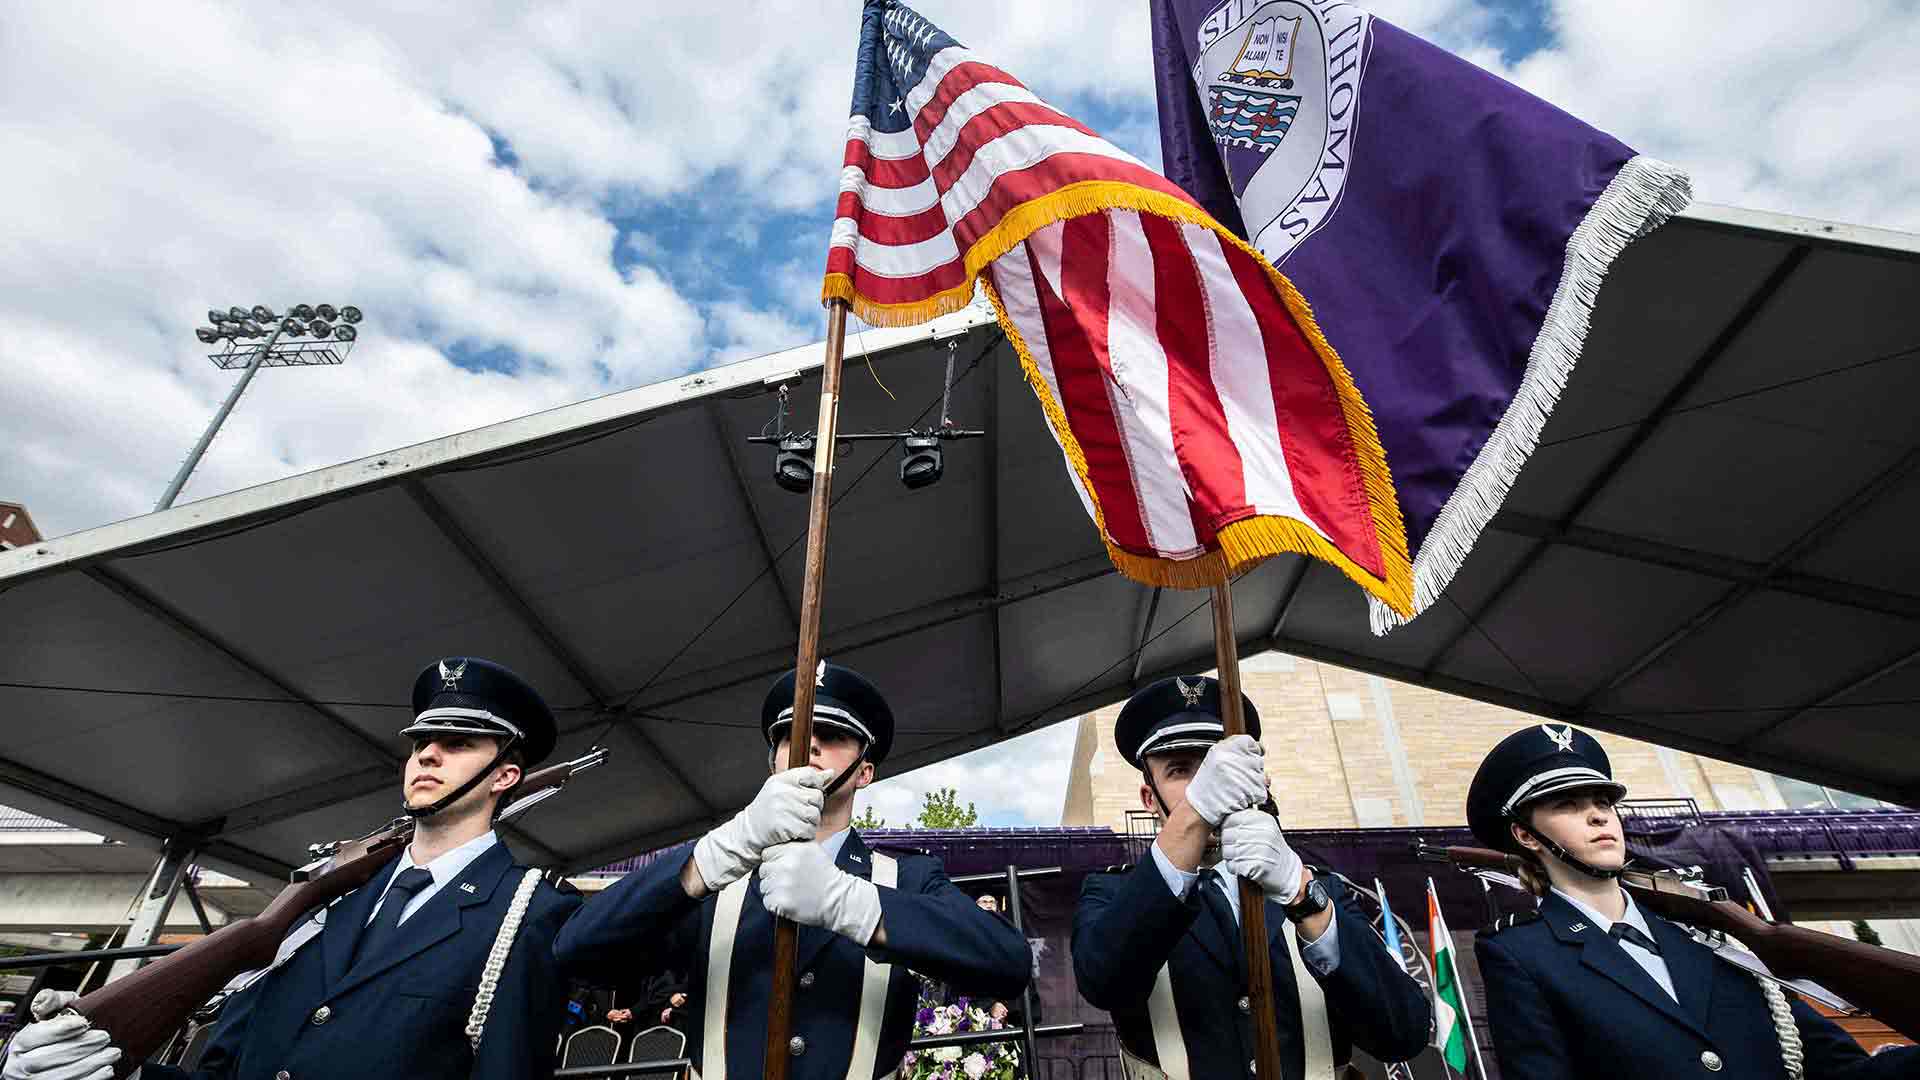 Four cadets stand at attention while performing a military honor guard ceremony during a Saint Thomas commencement ceremony.